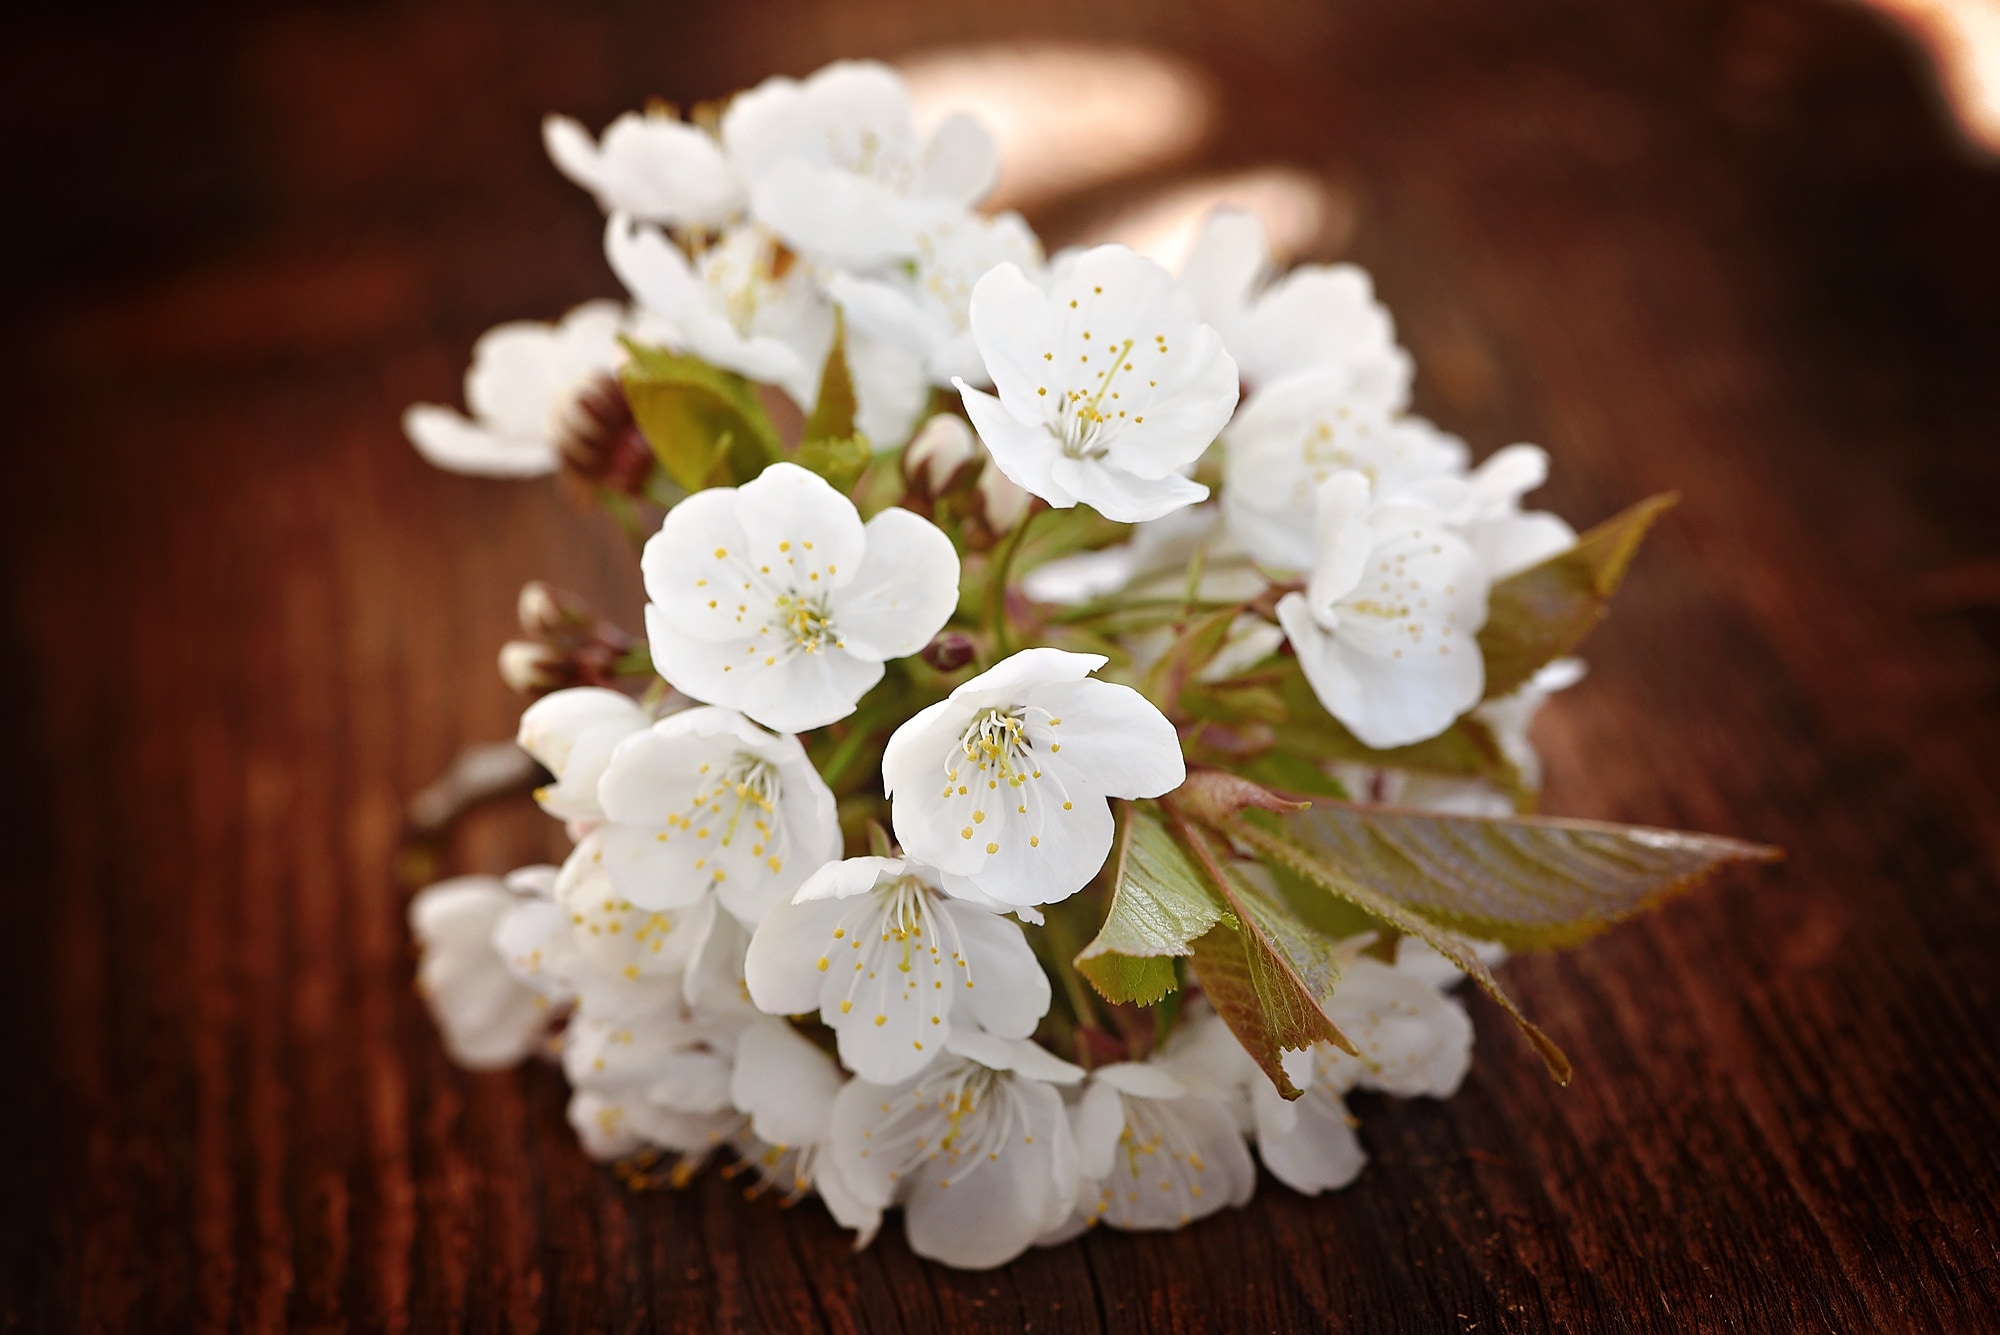 White, Cherry Blossoms, Flowers, Spring, flower, close-up